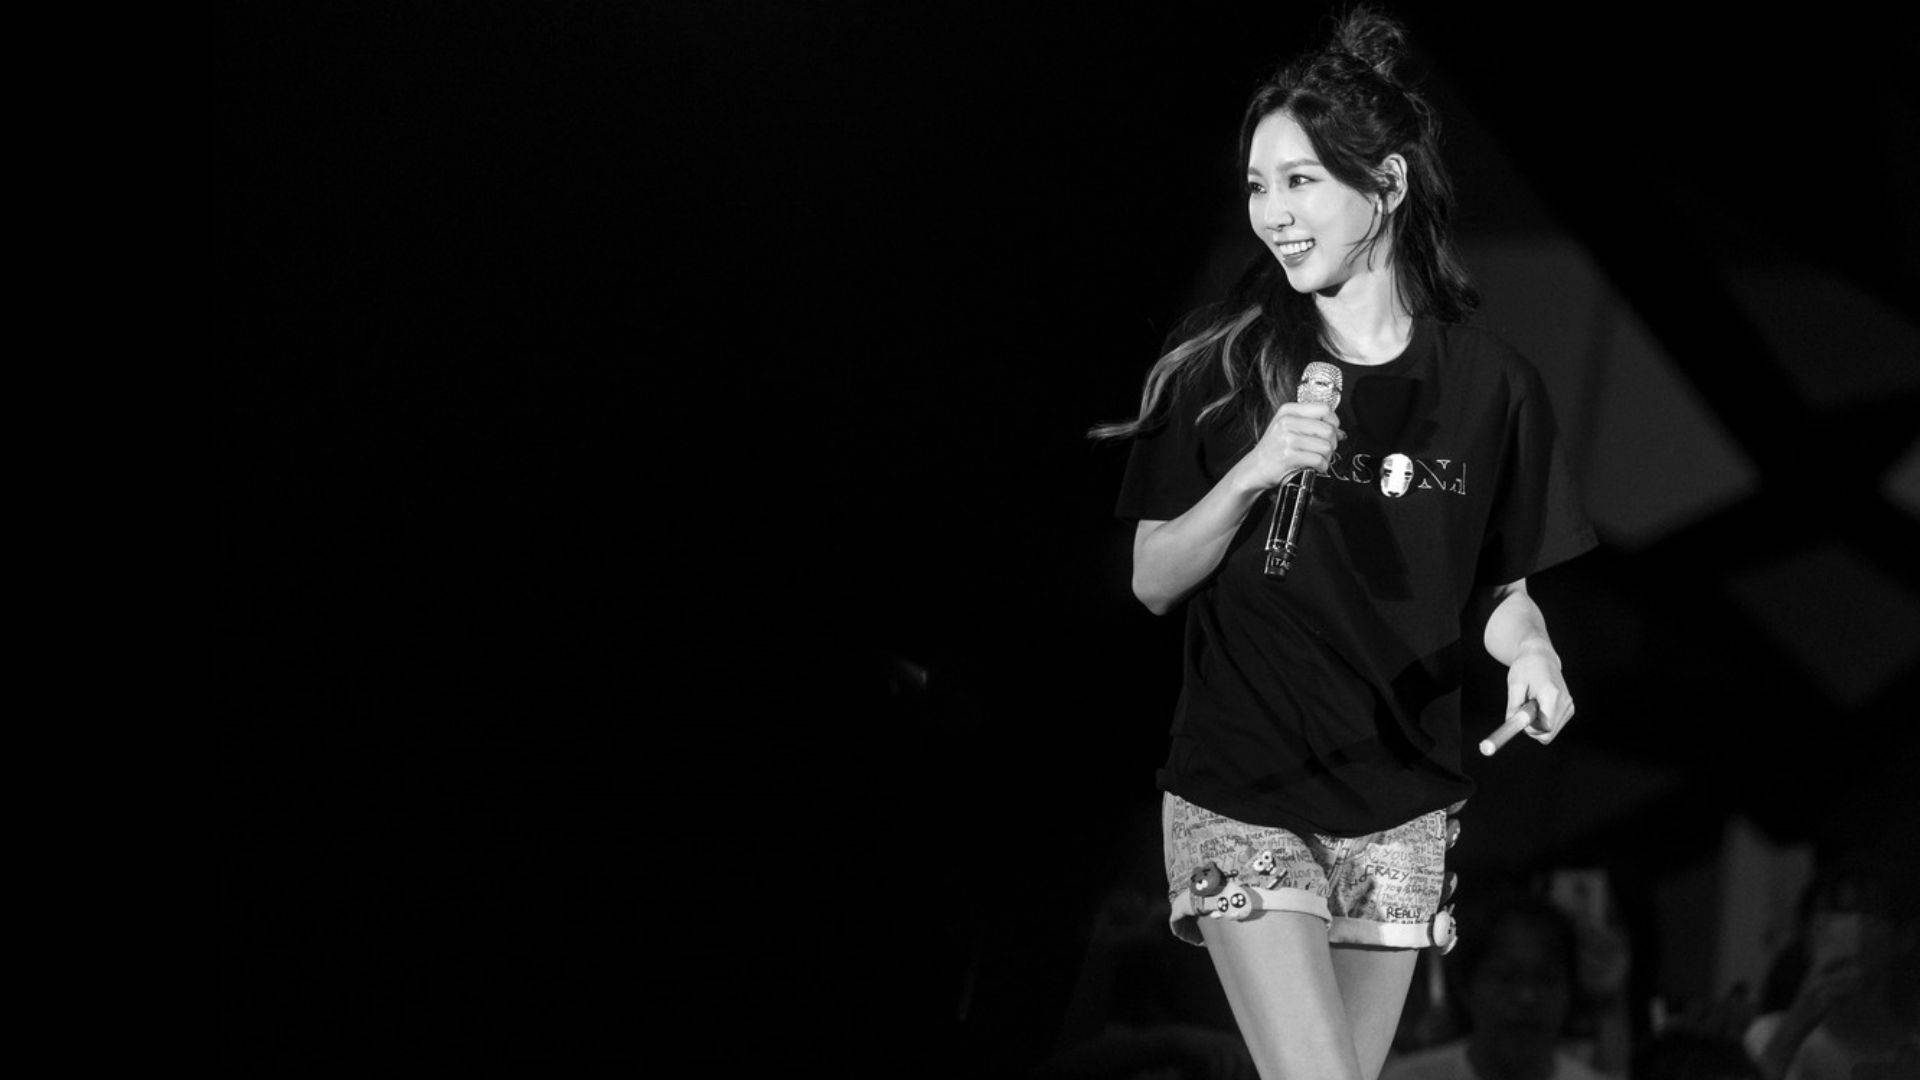 South Korean Pop Singer, Taeyeon, Electrifying Performance At A Concert Background